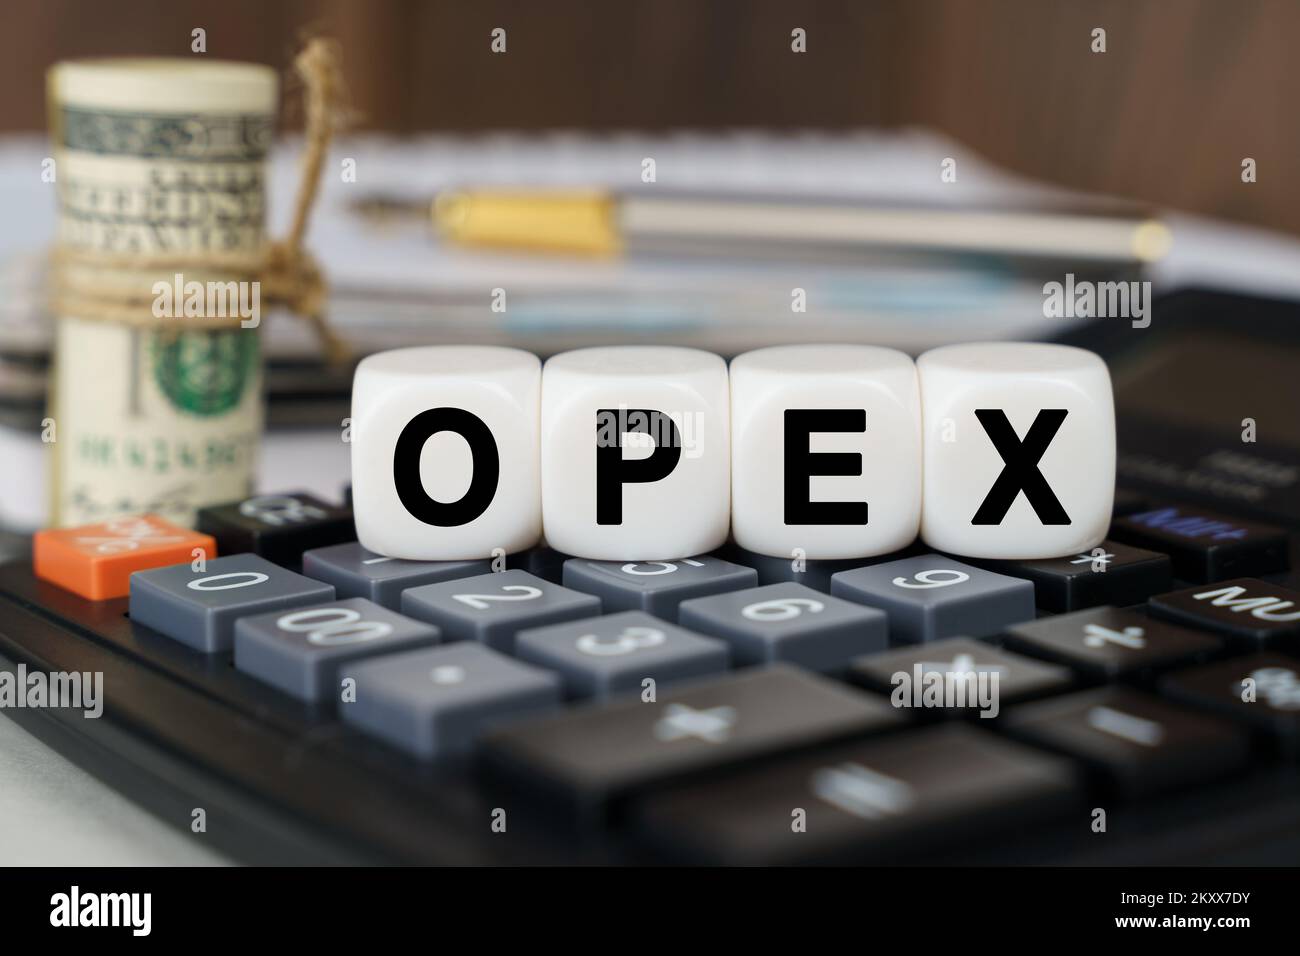 Business and finance concept. There are cubes on the calculator that say - OPEX. Nearby out of focus - dollars, notebook and pen Stock Photo